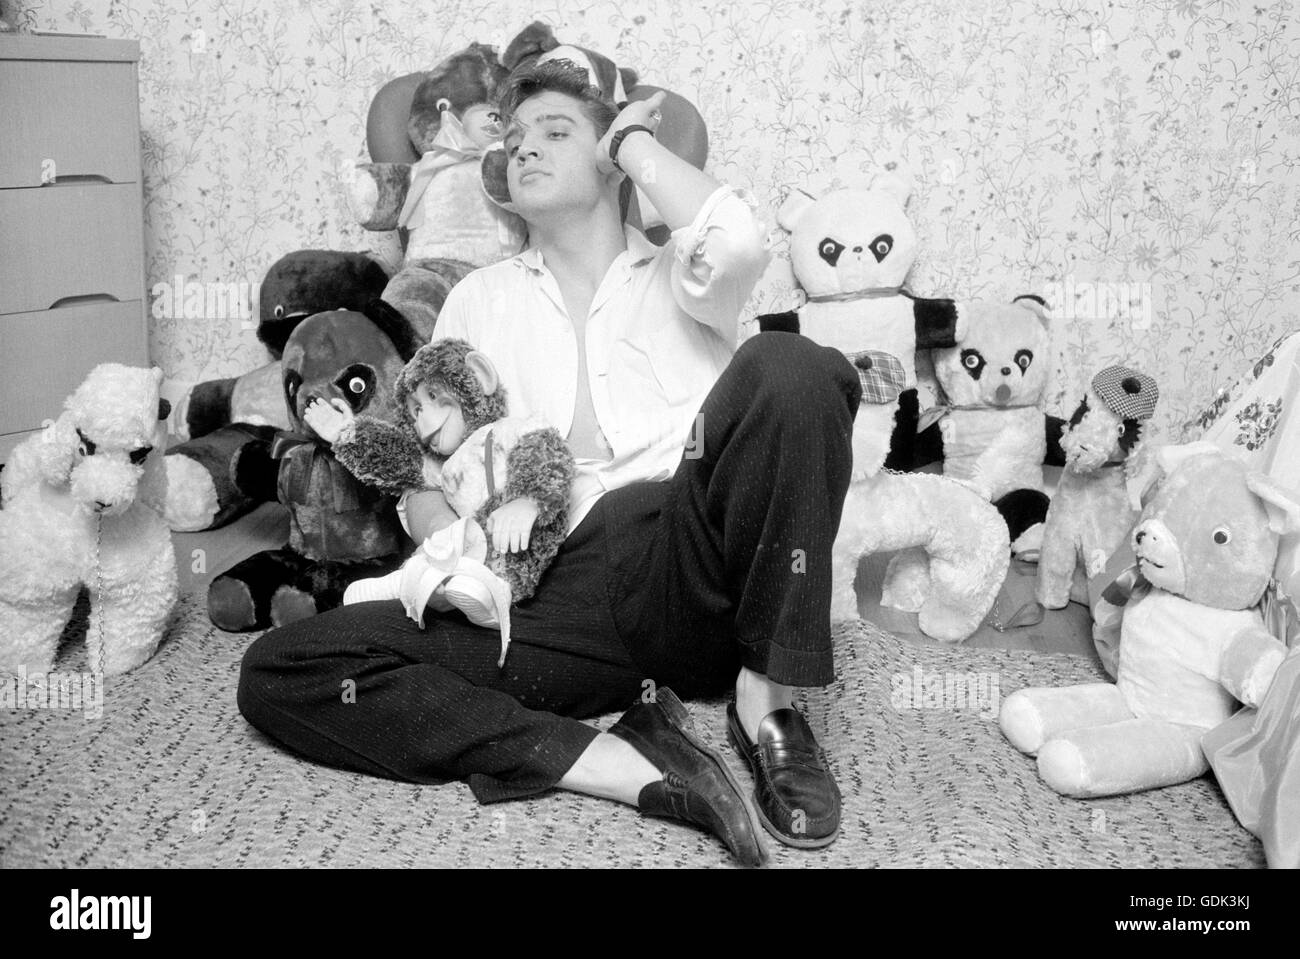 Elvis Presley at home, with teddy bears Stock Photo